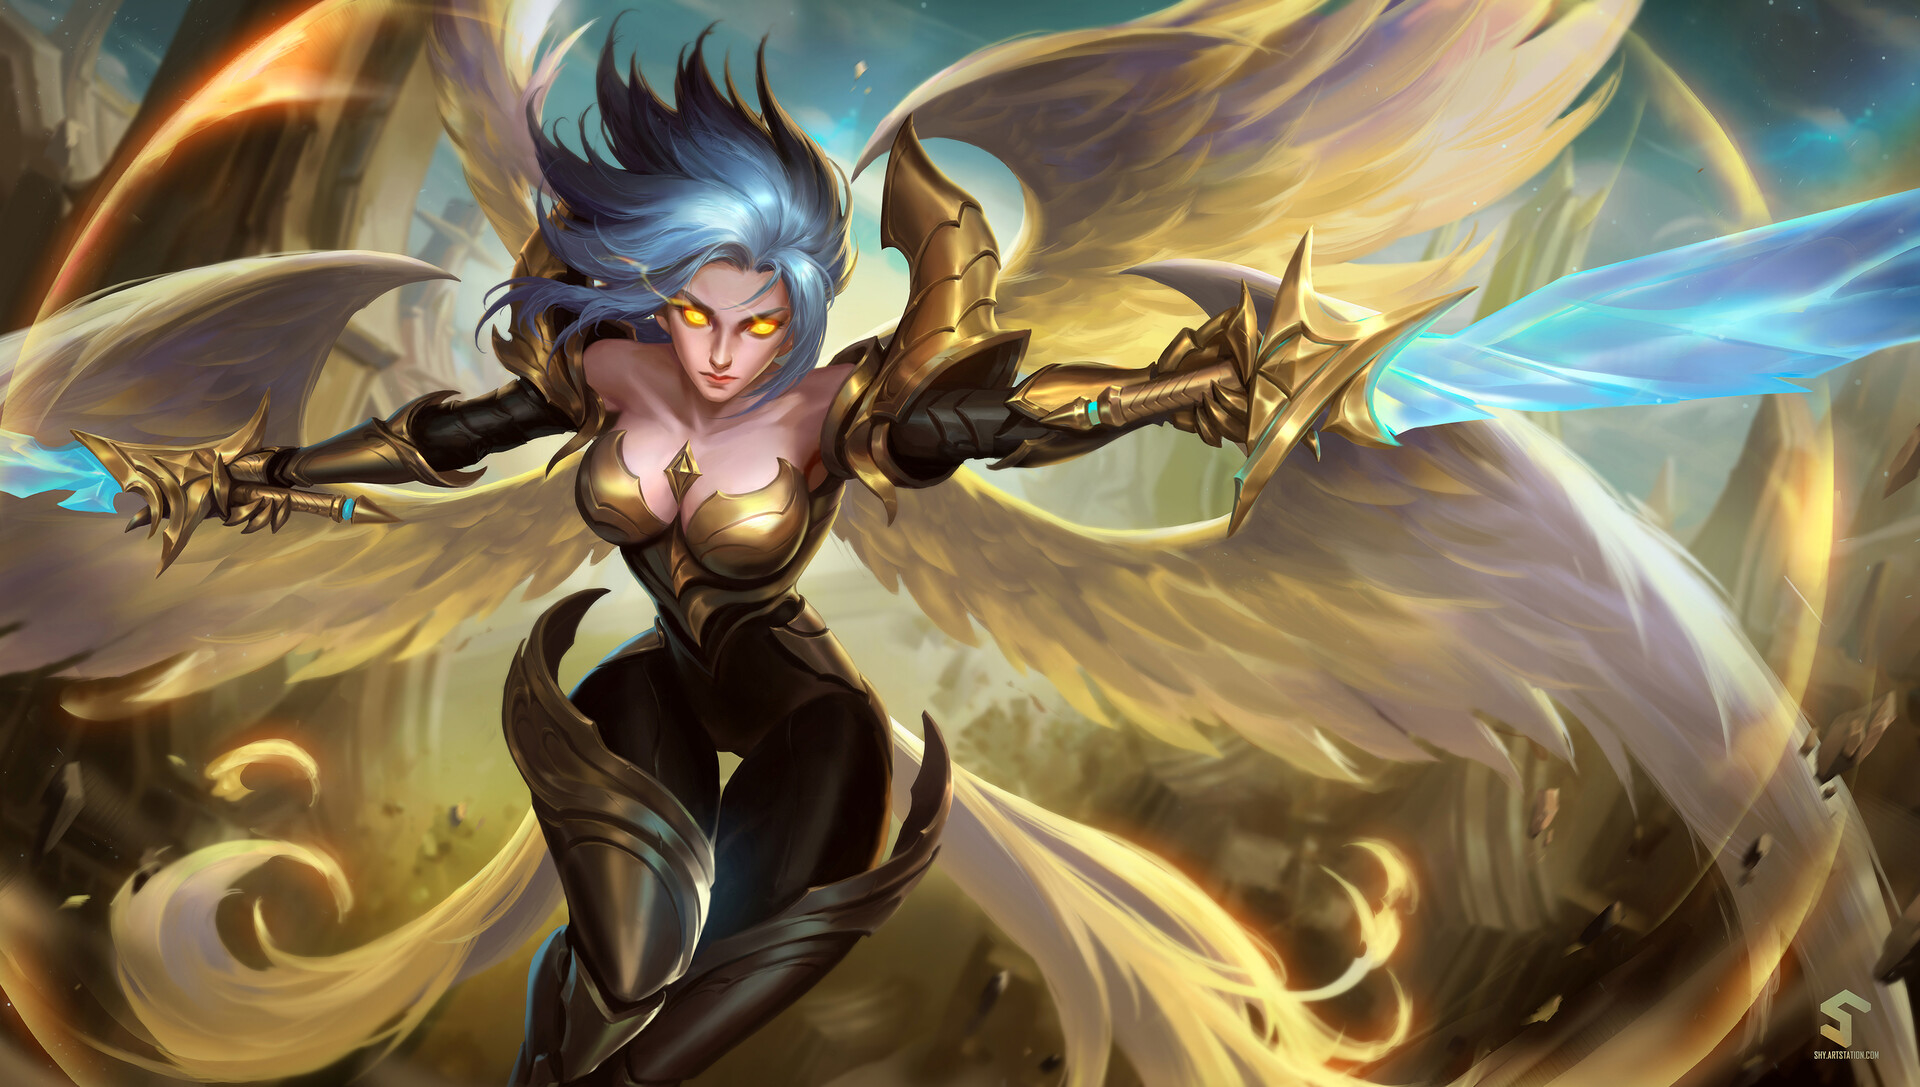 Kayle League Of Legends Wallpaper, HD Games 4K Wallpapers, Images and